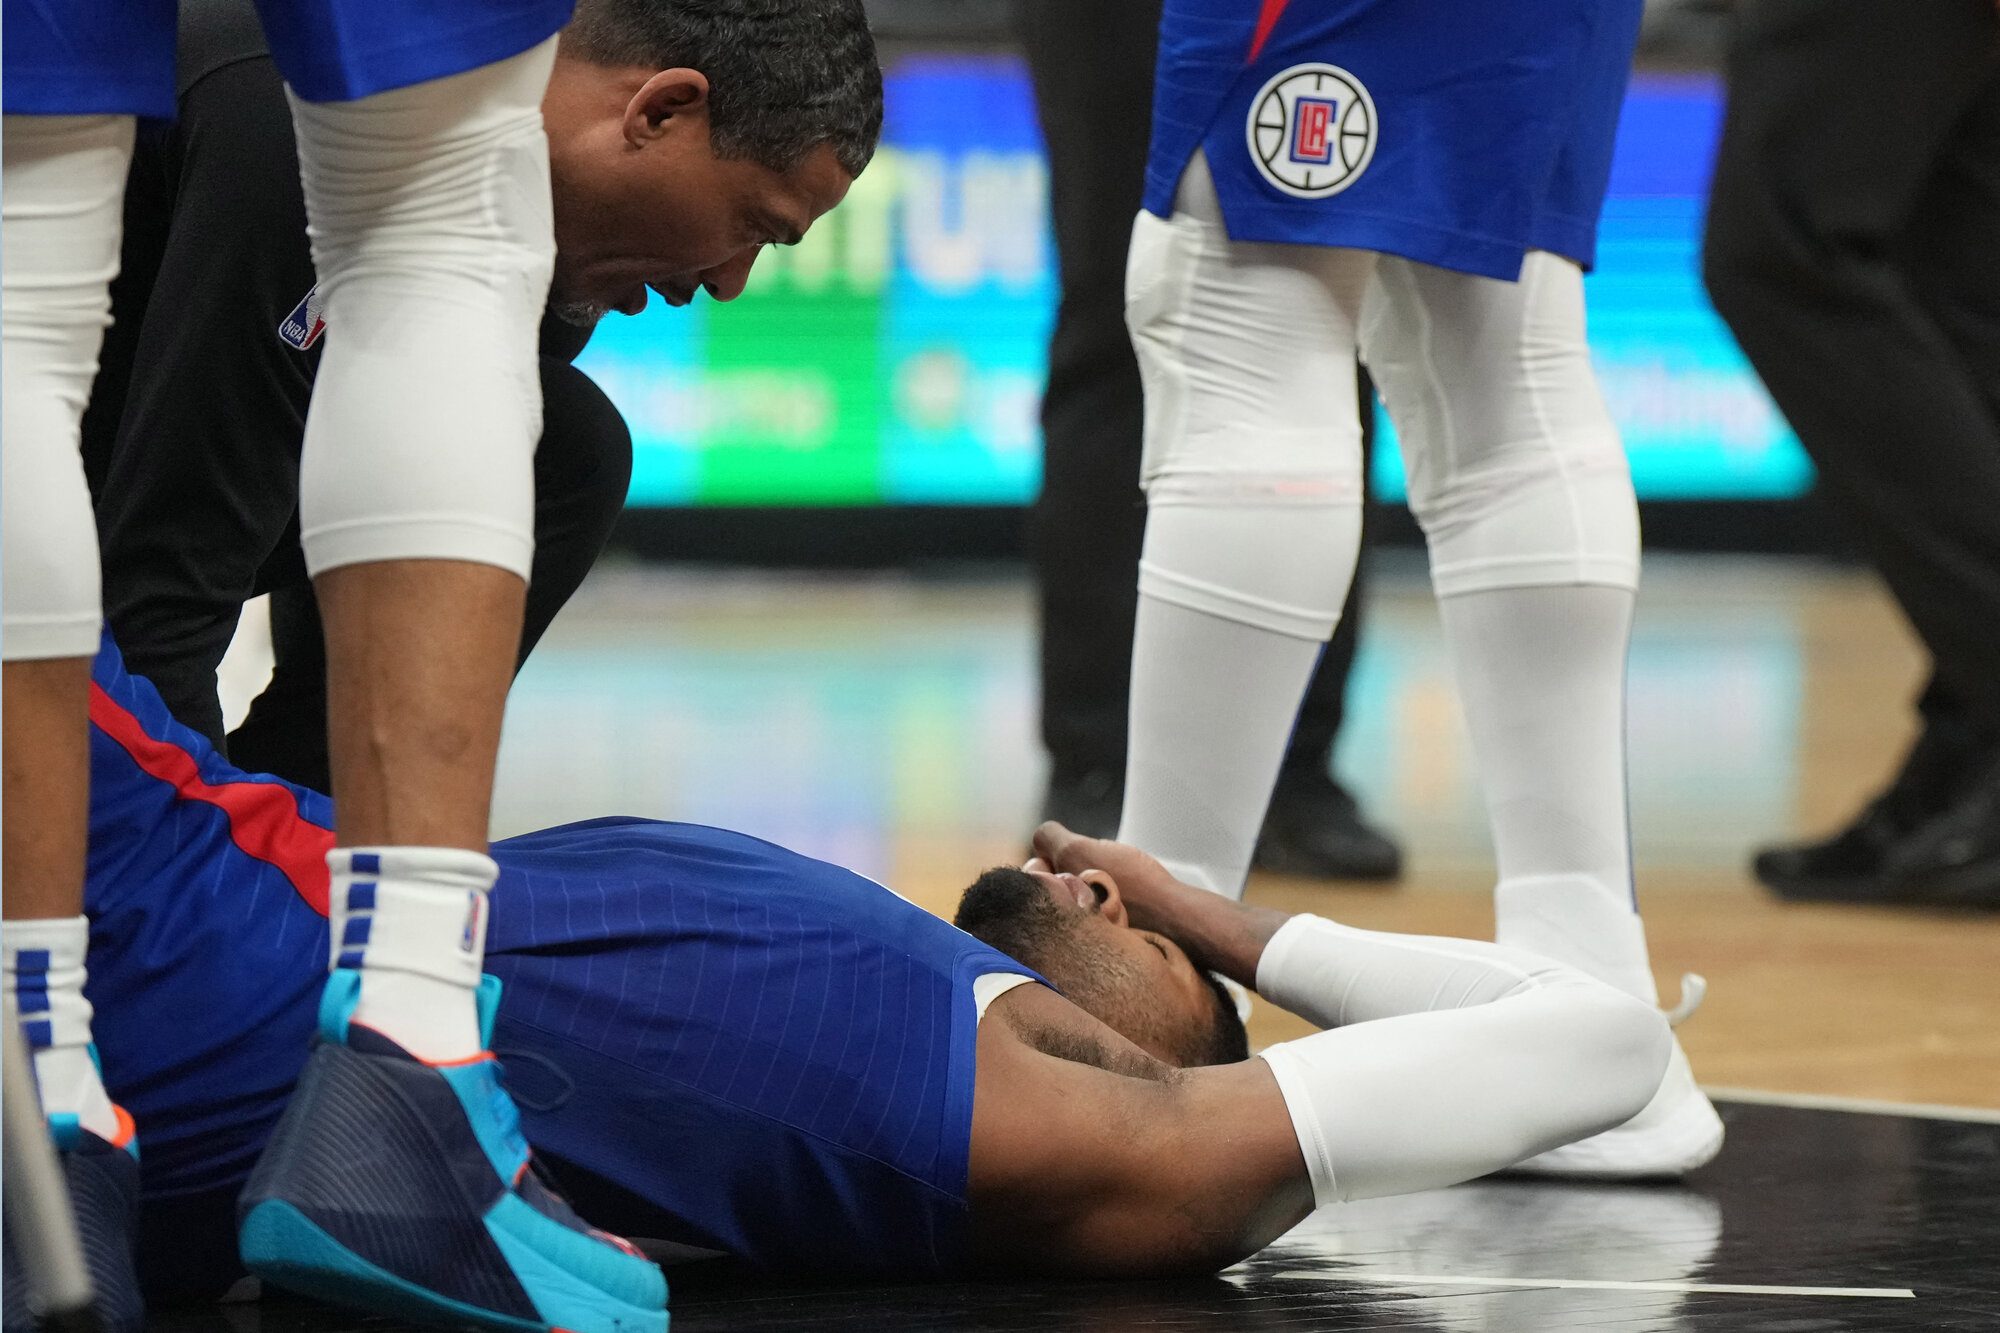 Thunder sneak by Clippers after Paul George injury